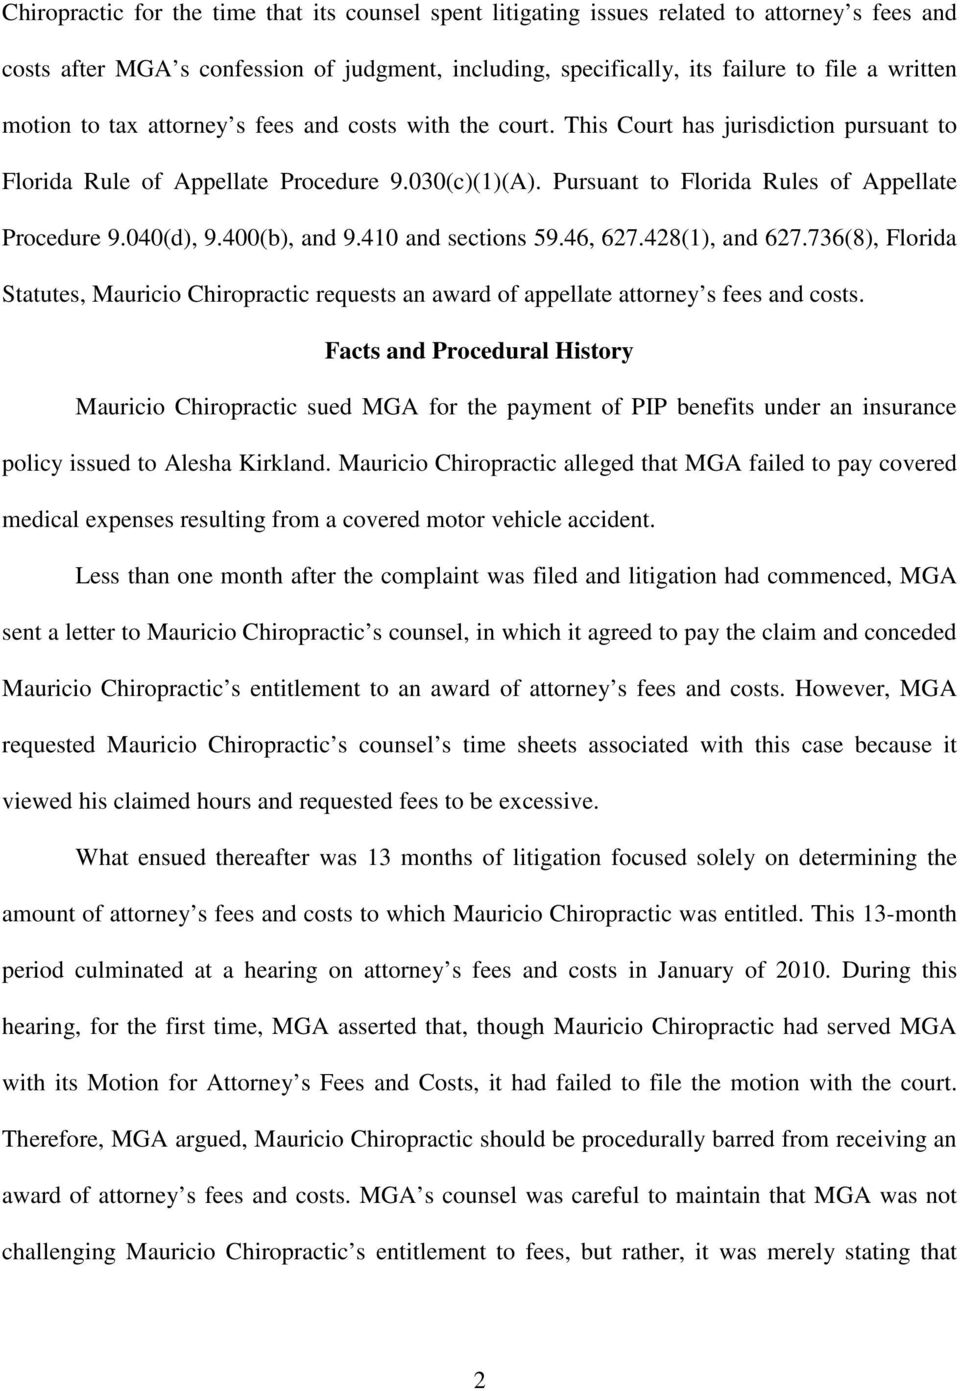 040(d), 9.400(b), and 9.410 and sections 59.46, 627.428(1), and 627.736(8), Florida Statutes, Mauricio Chiropractic requests an award of appellate attorney s fees and costs.